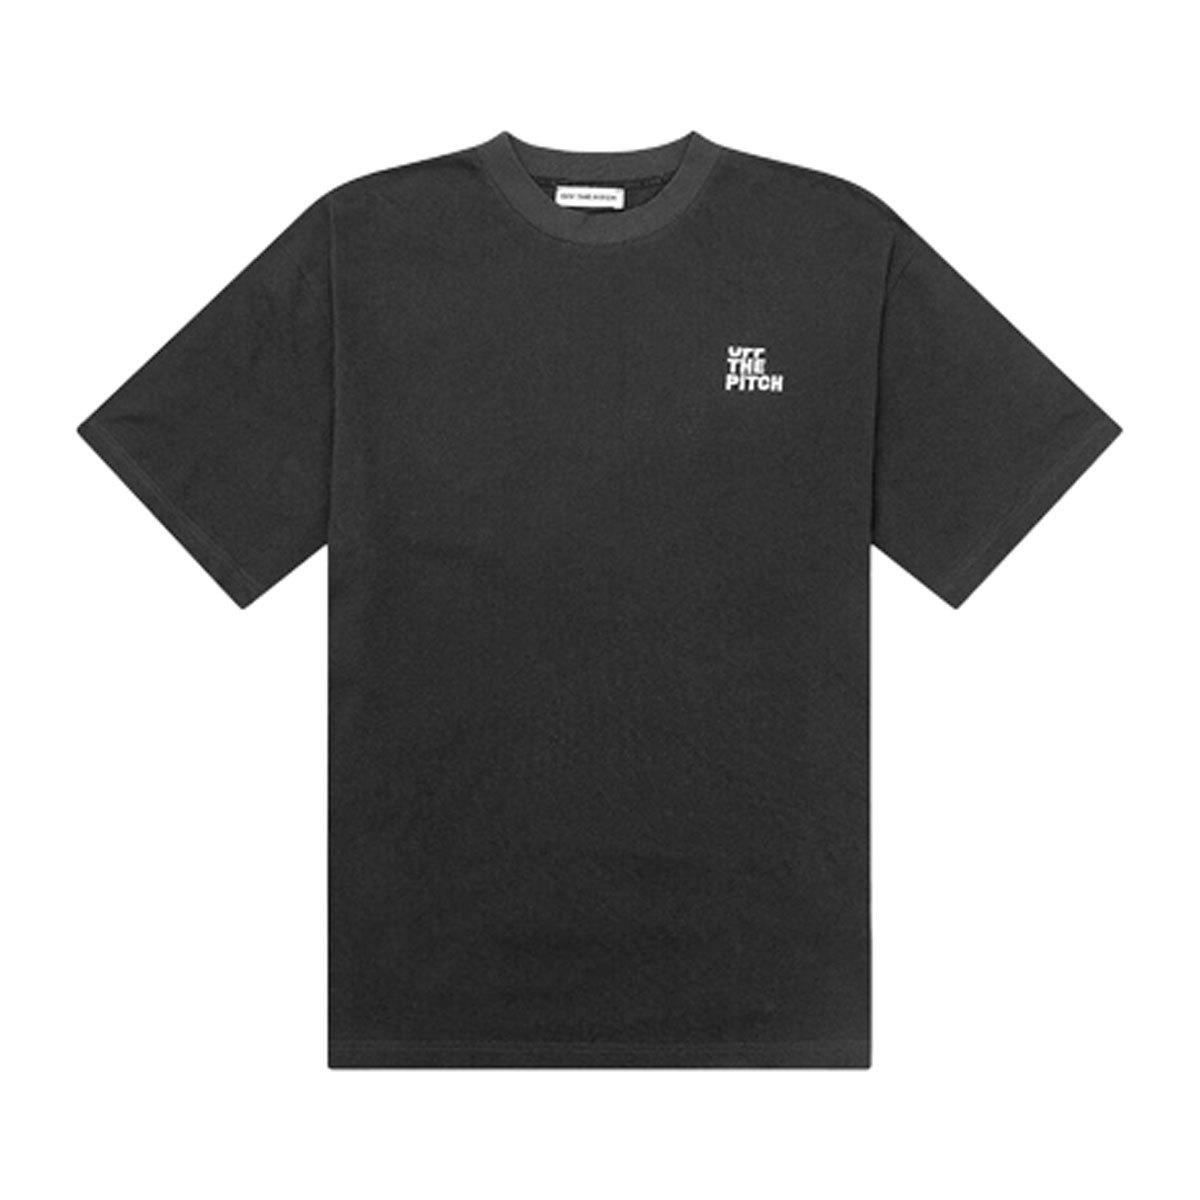 Loose Fit Pitch Tee